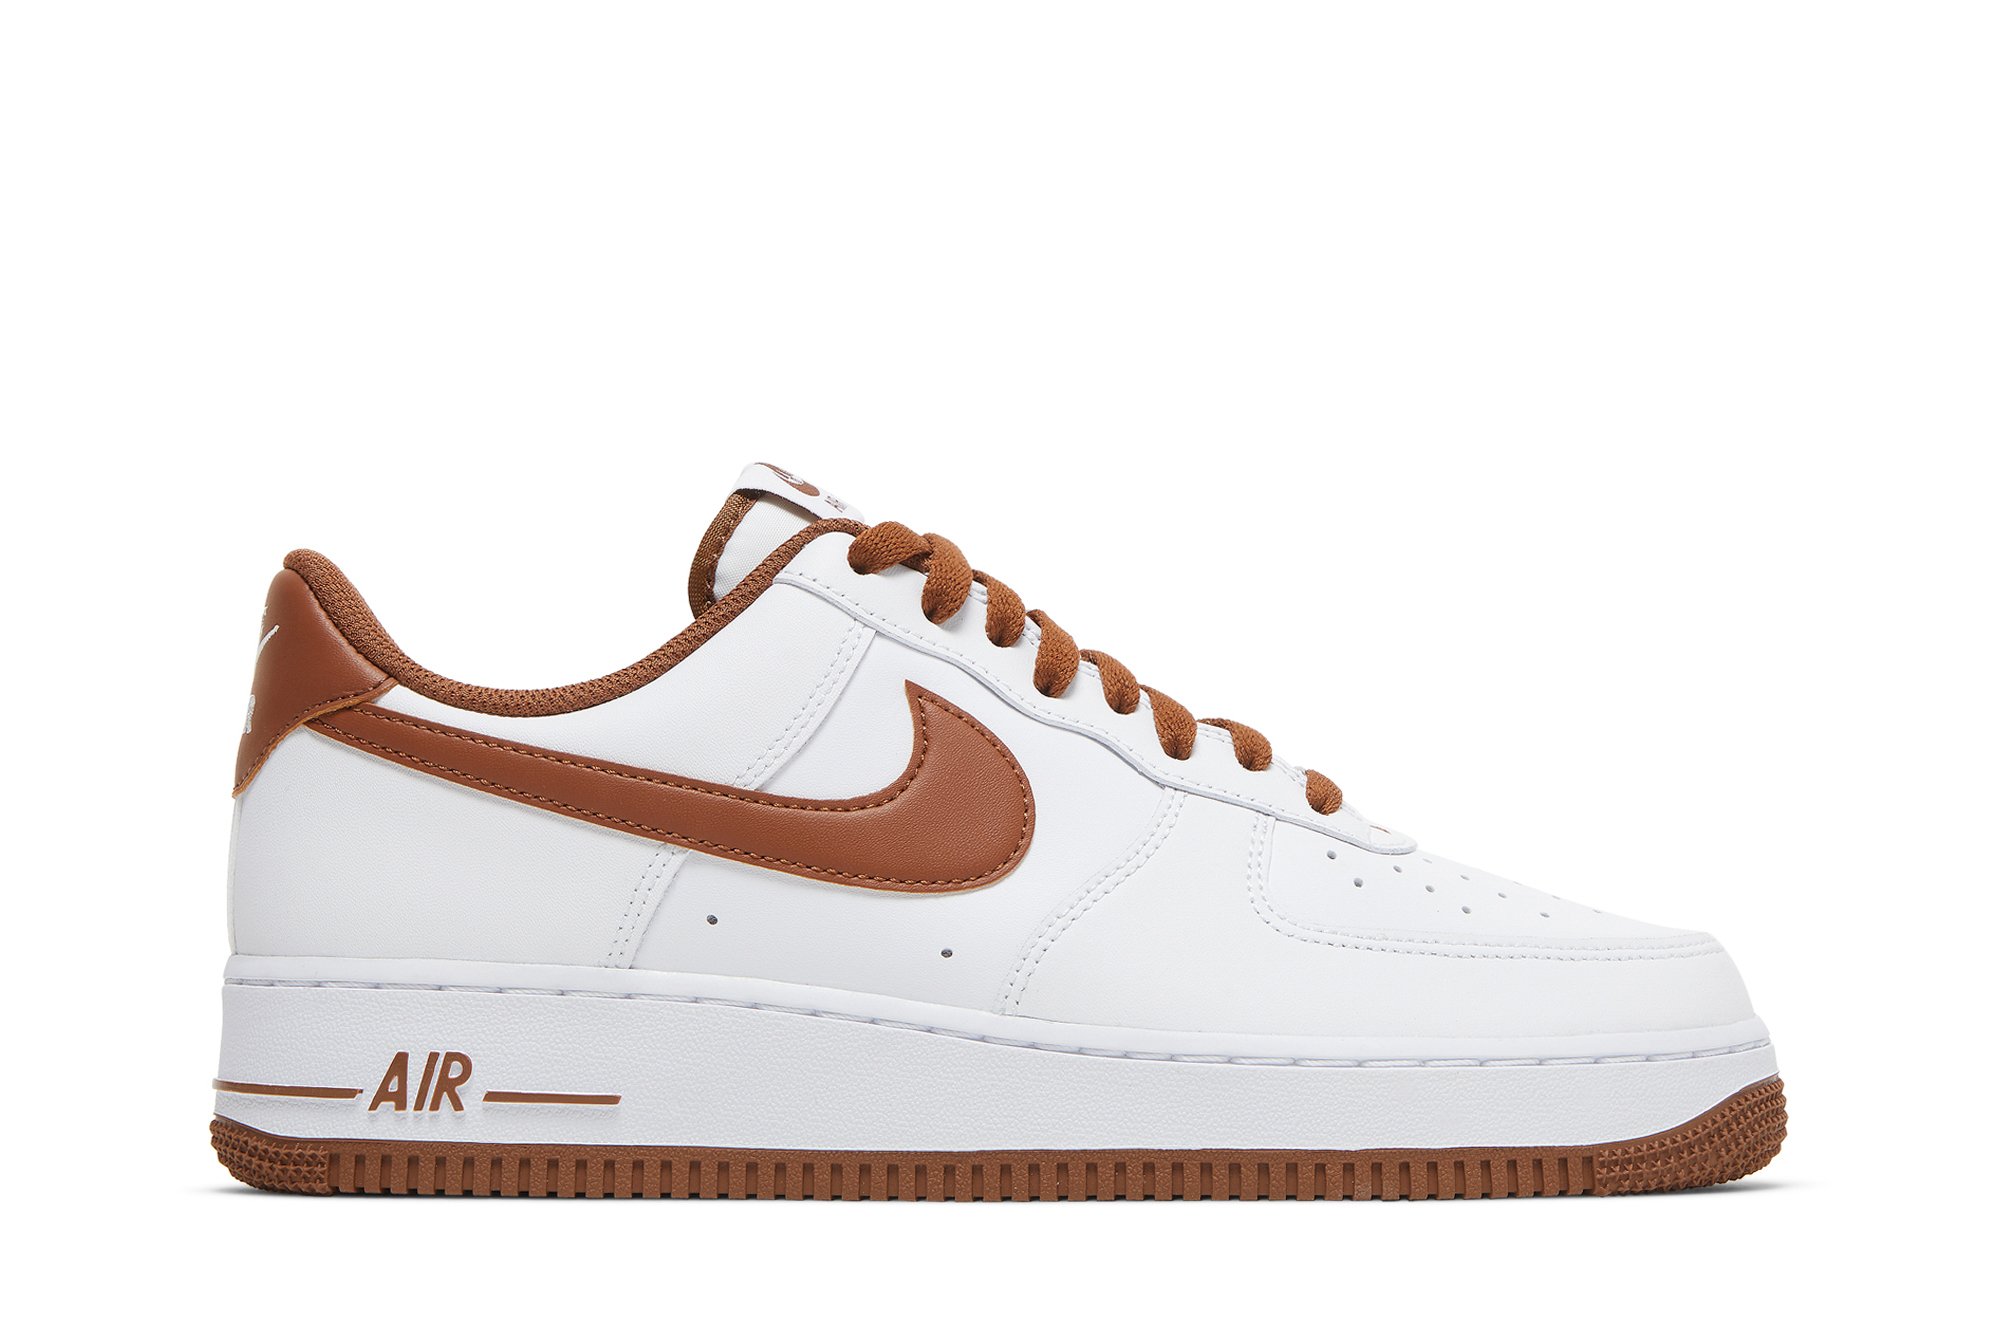 Buy Air Force 1 '07 'Pecan' - DH7561 100 - White | GOAT